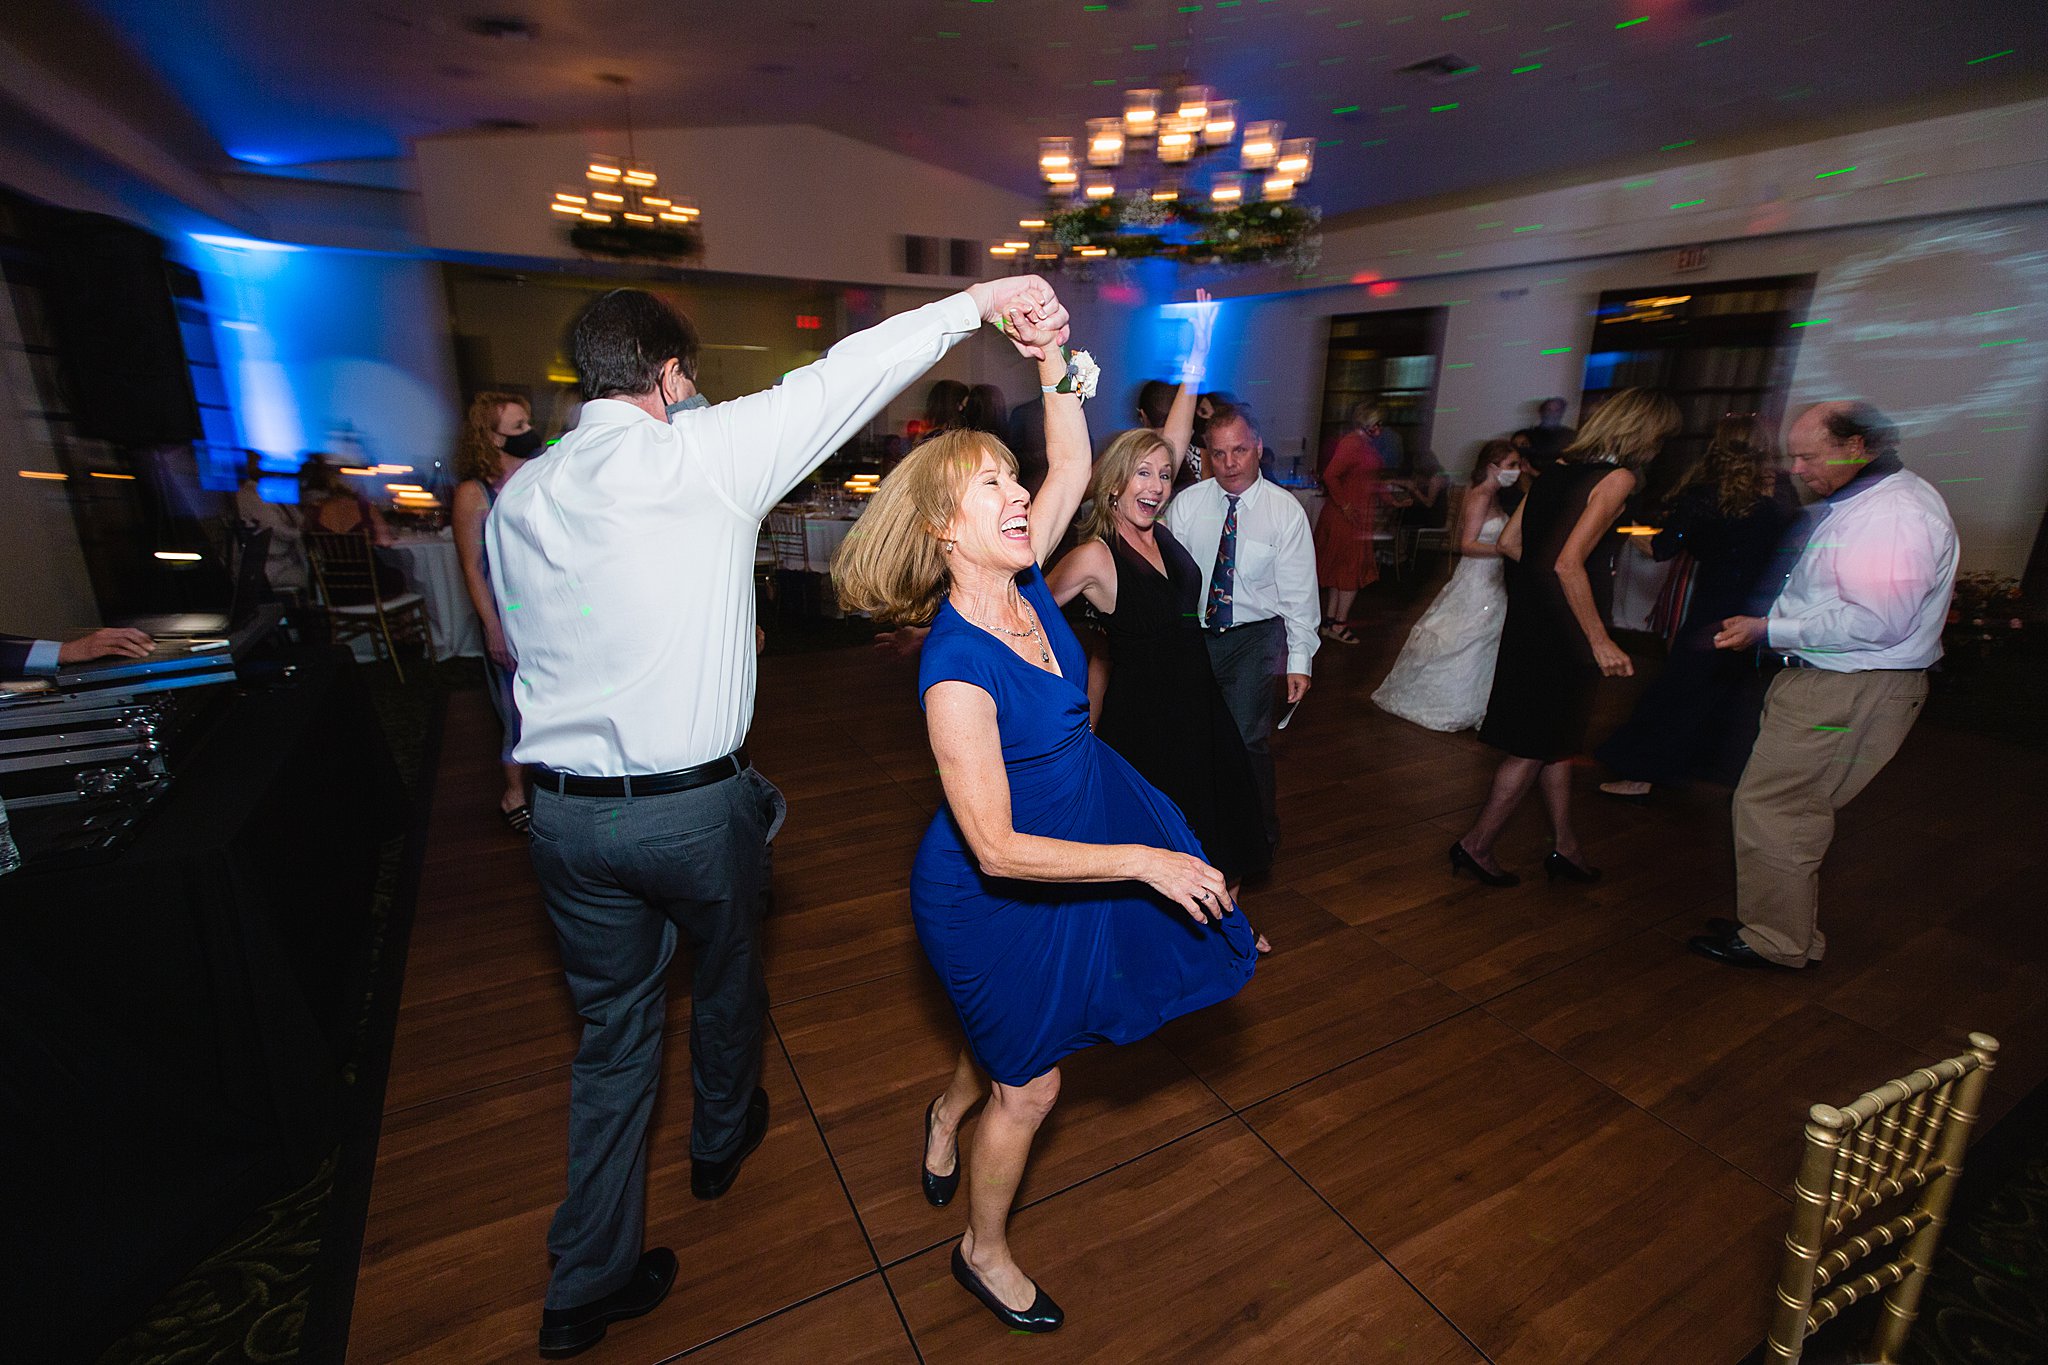 Guests dancing together at Secret Garden Events wedding reception by Phoenix wedding photographer PMA Photography